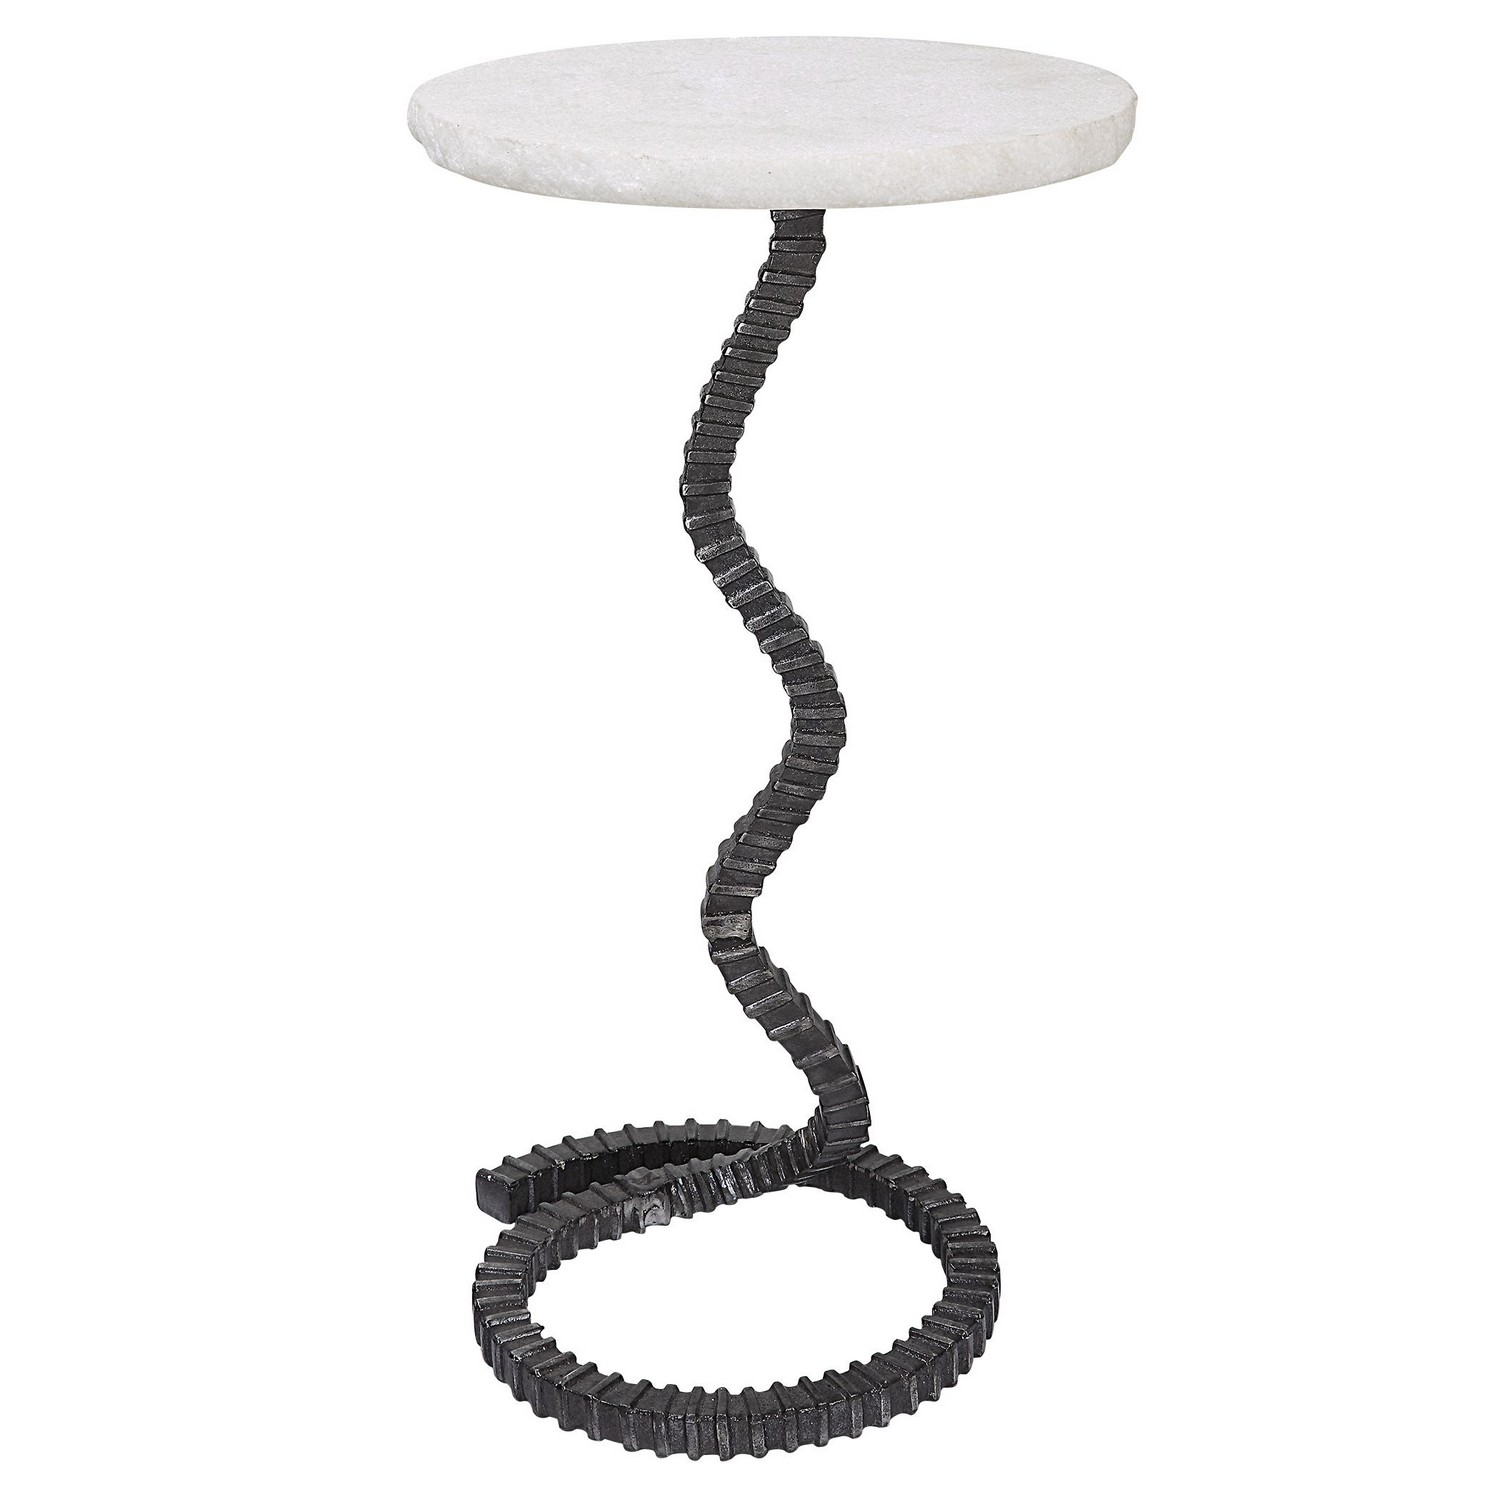 Uttermost Lasso Drink Table - White